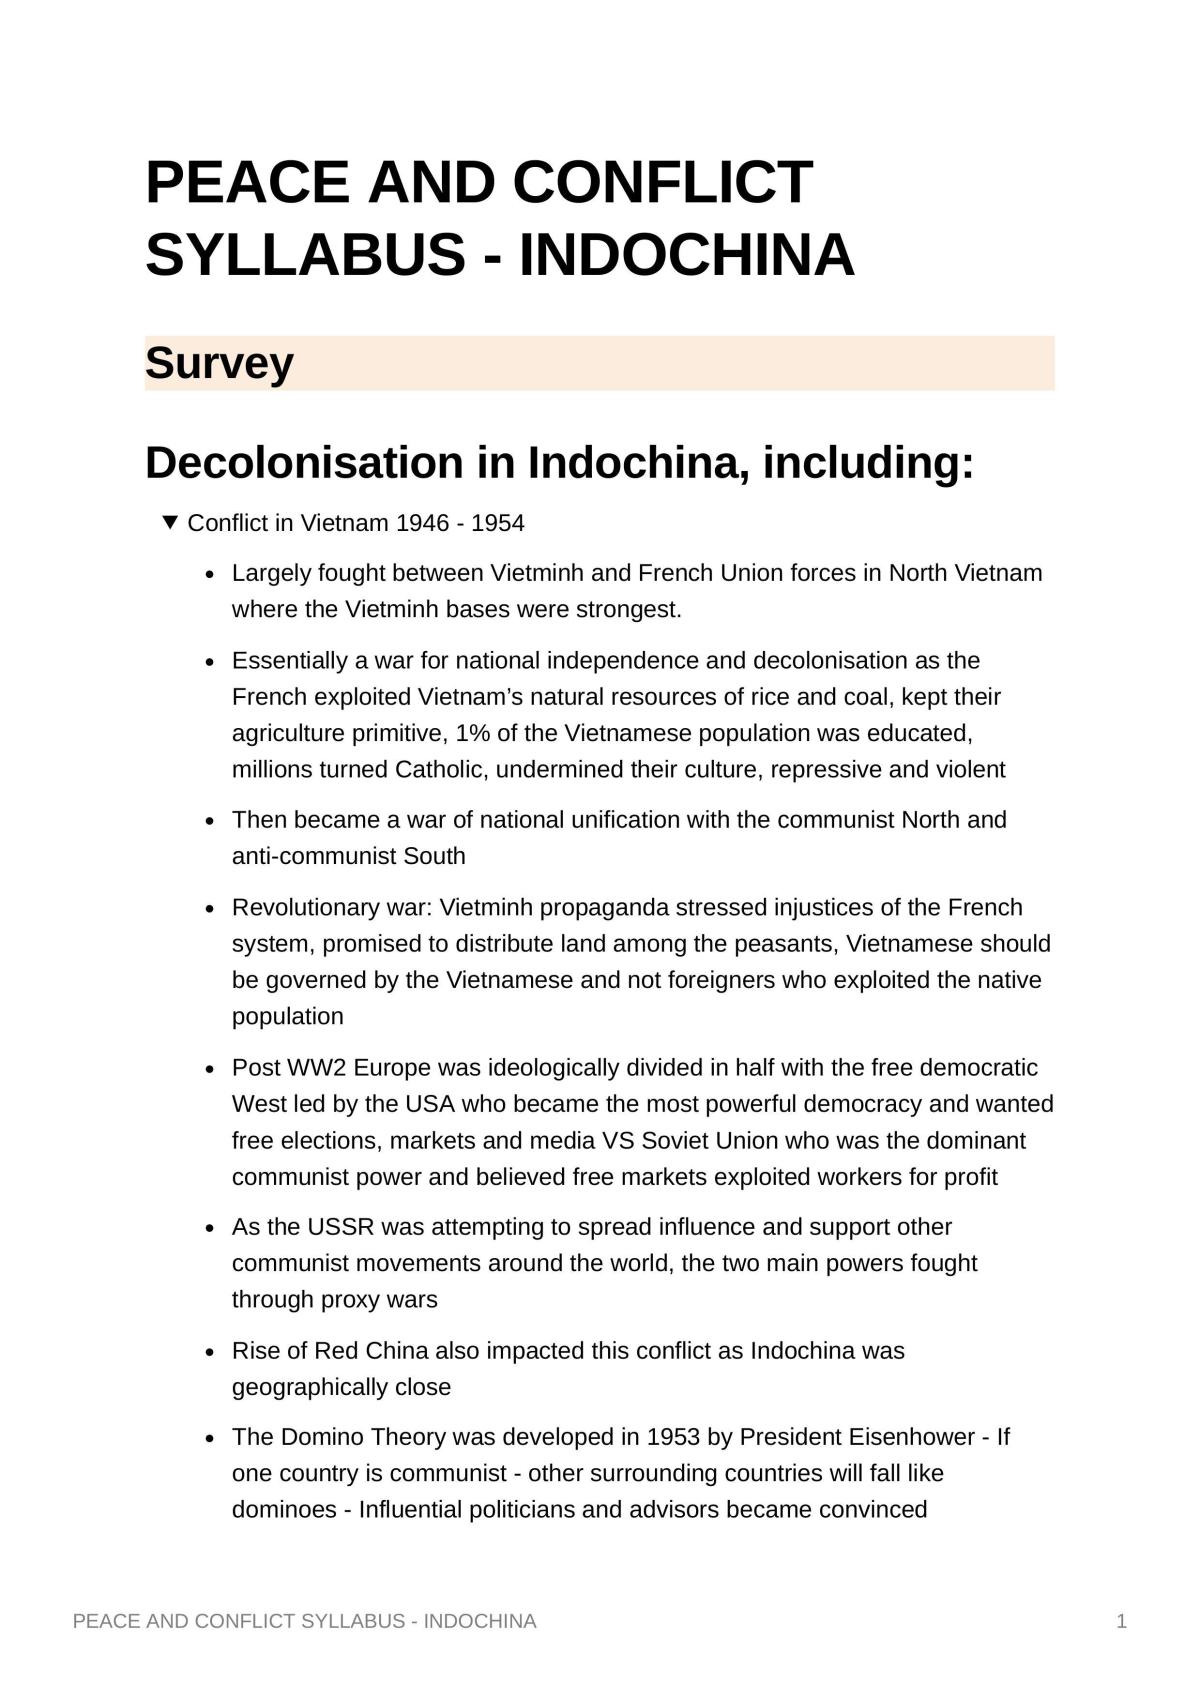 Peace and Conflict Syllabus - Indochina  - Page 1